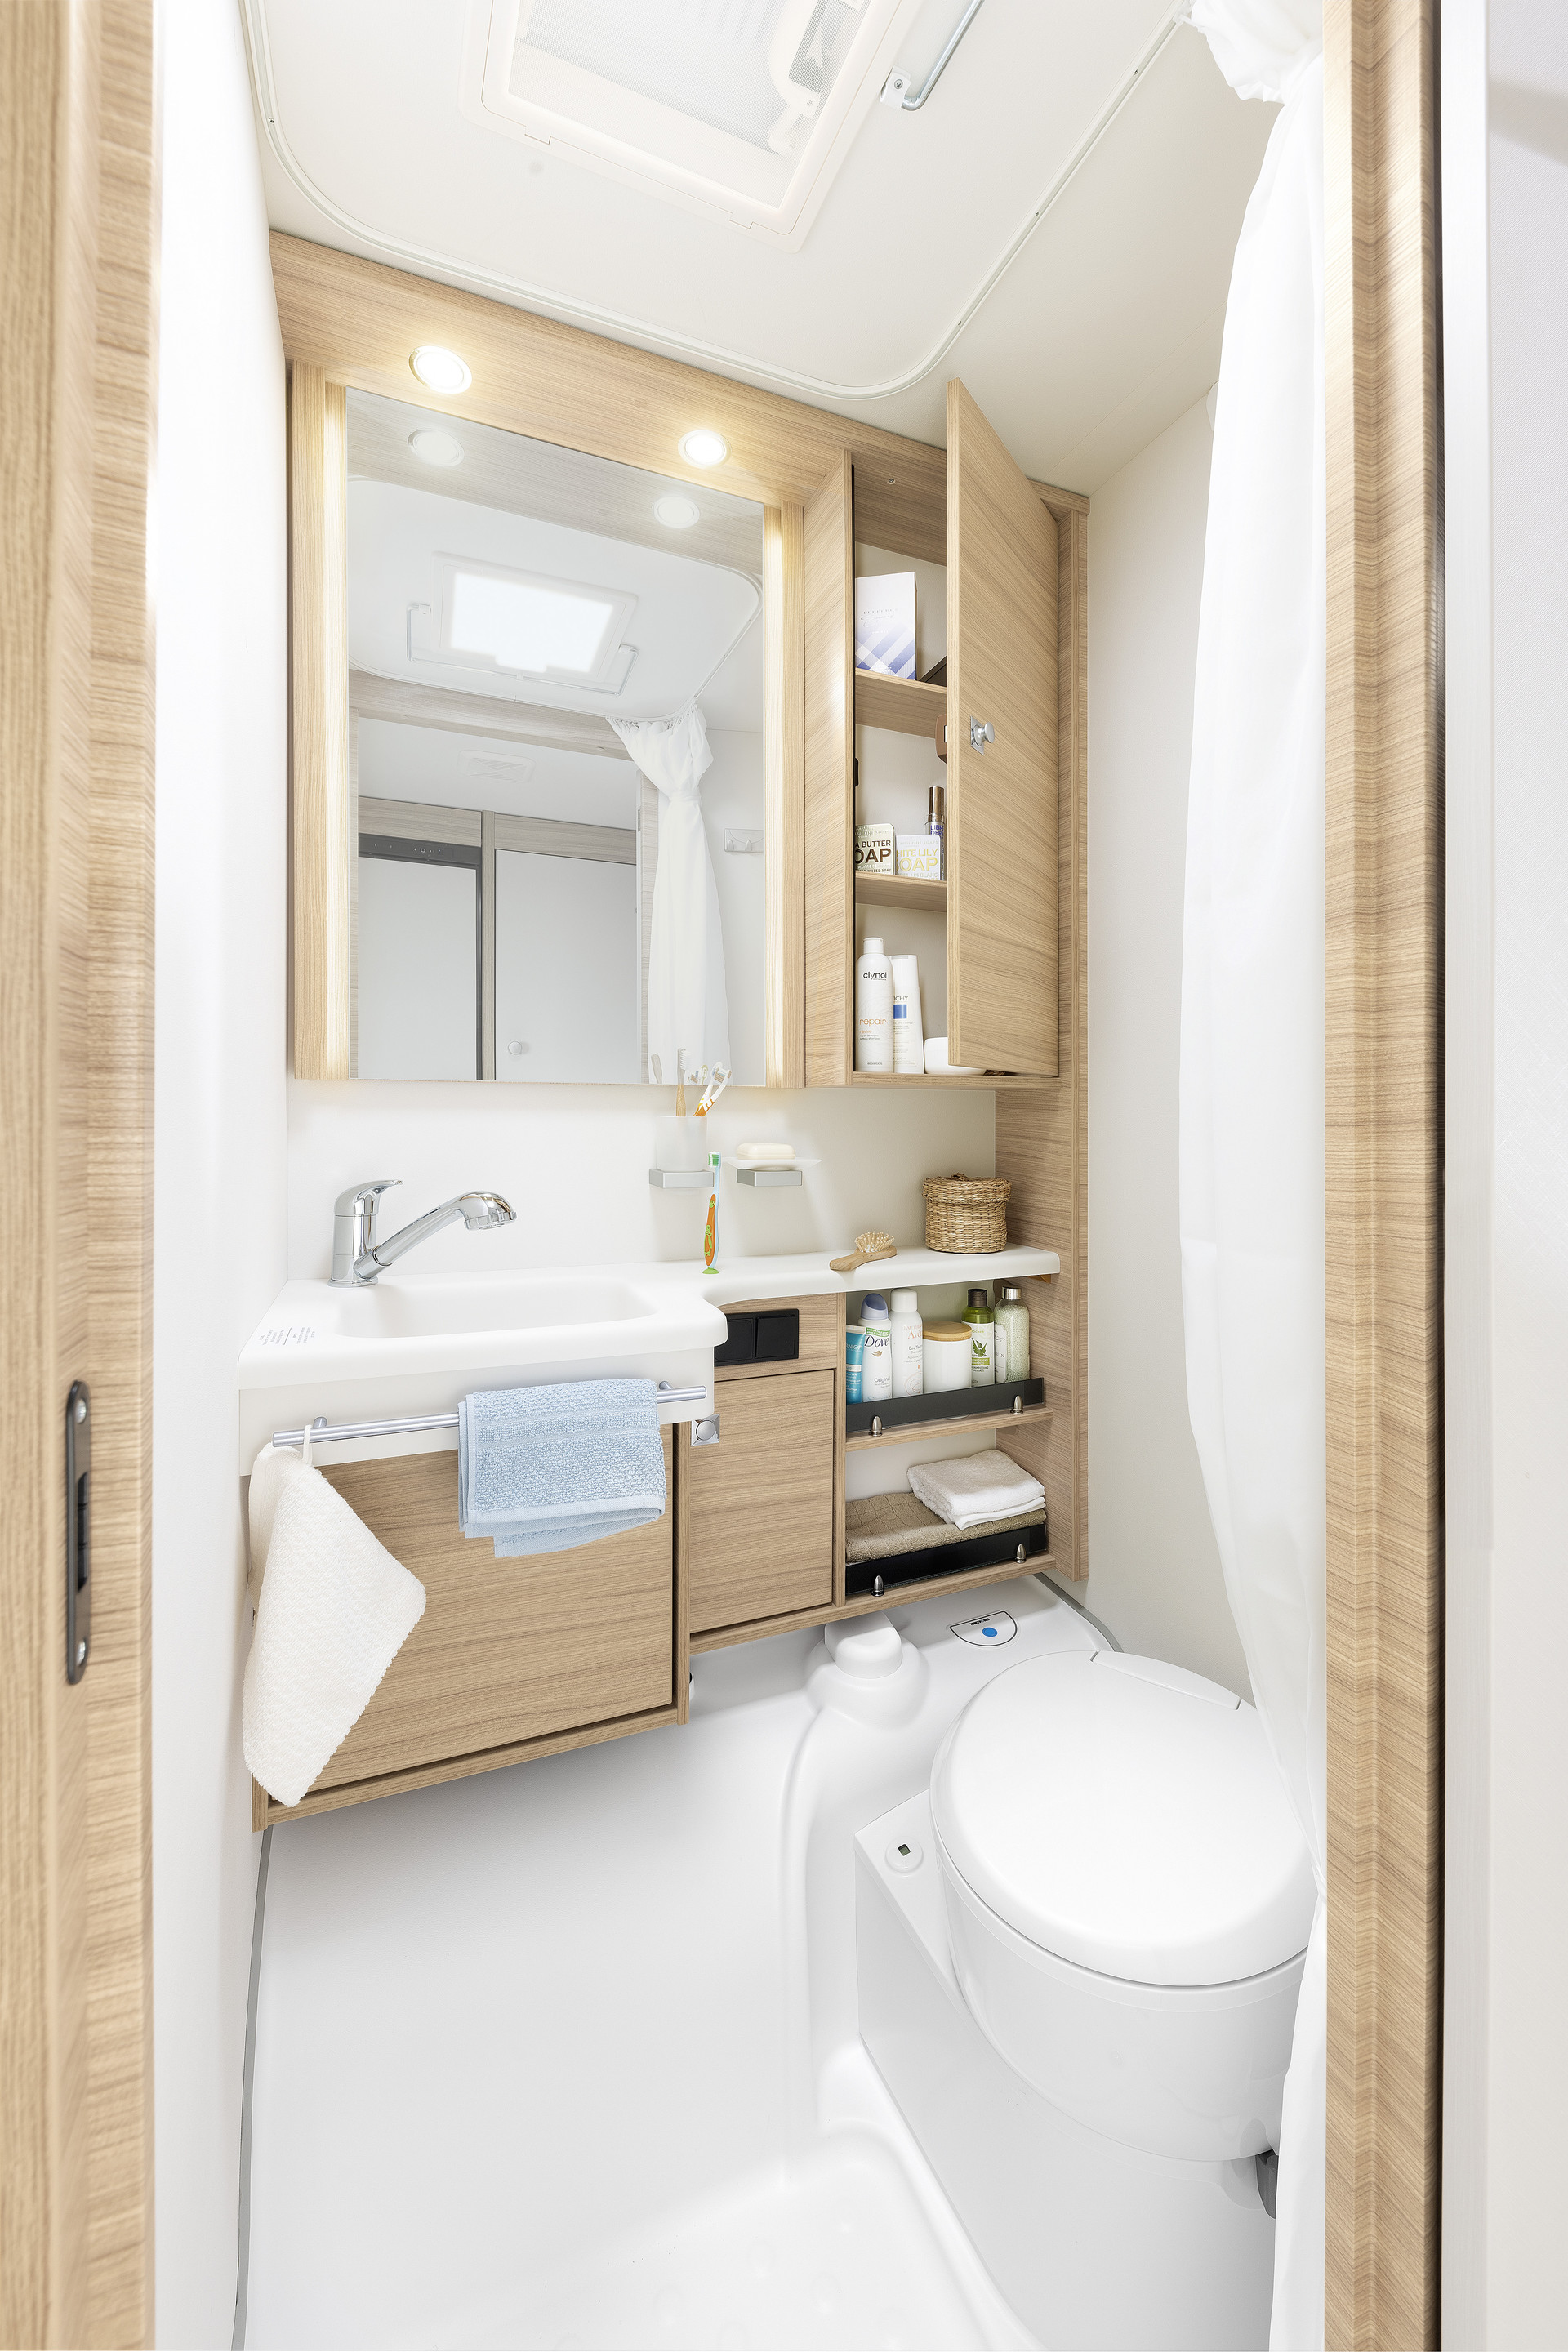 With its compact bathroom, the Camper includes everything you need to freshen up for your holiday • 550 ESK | Mount